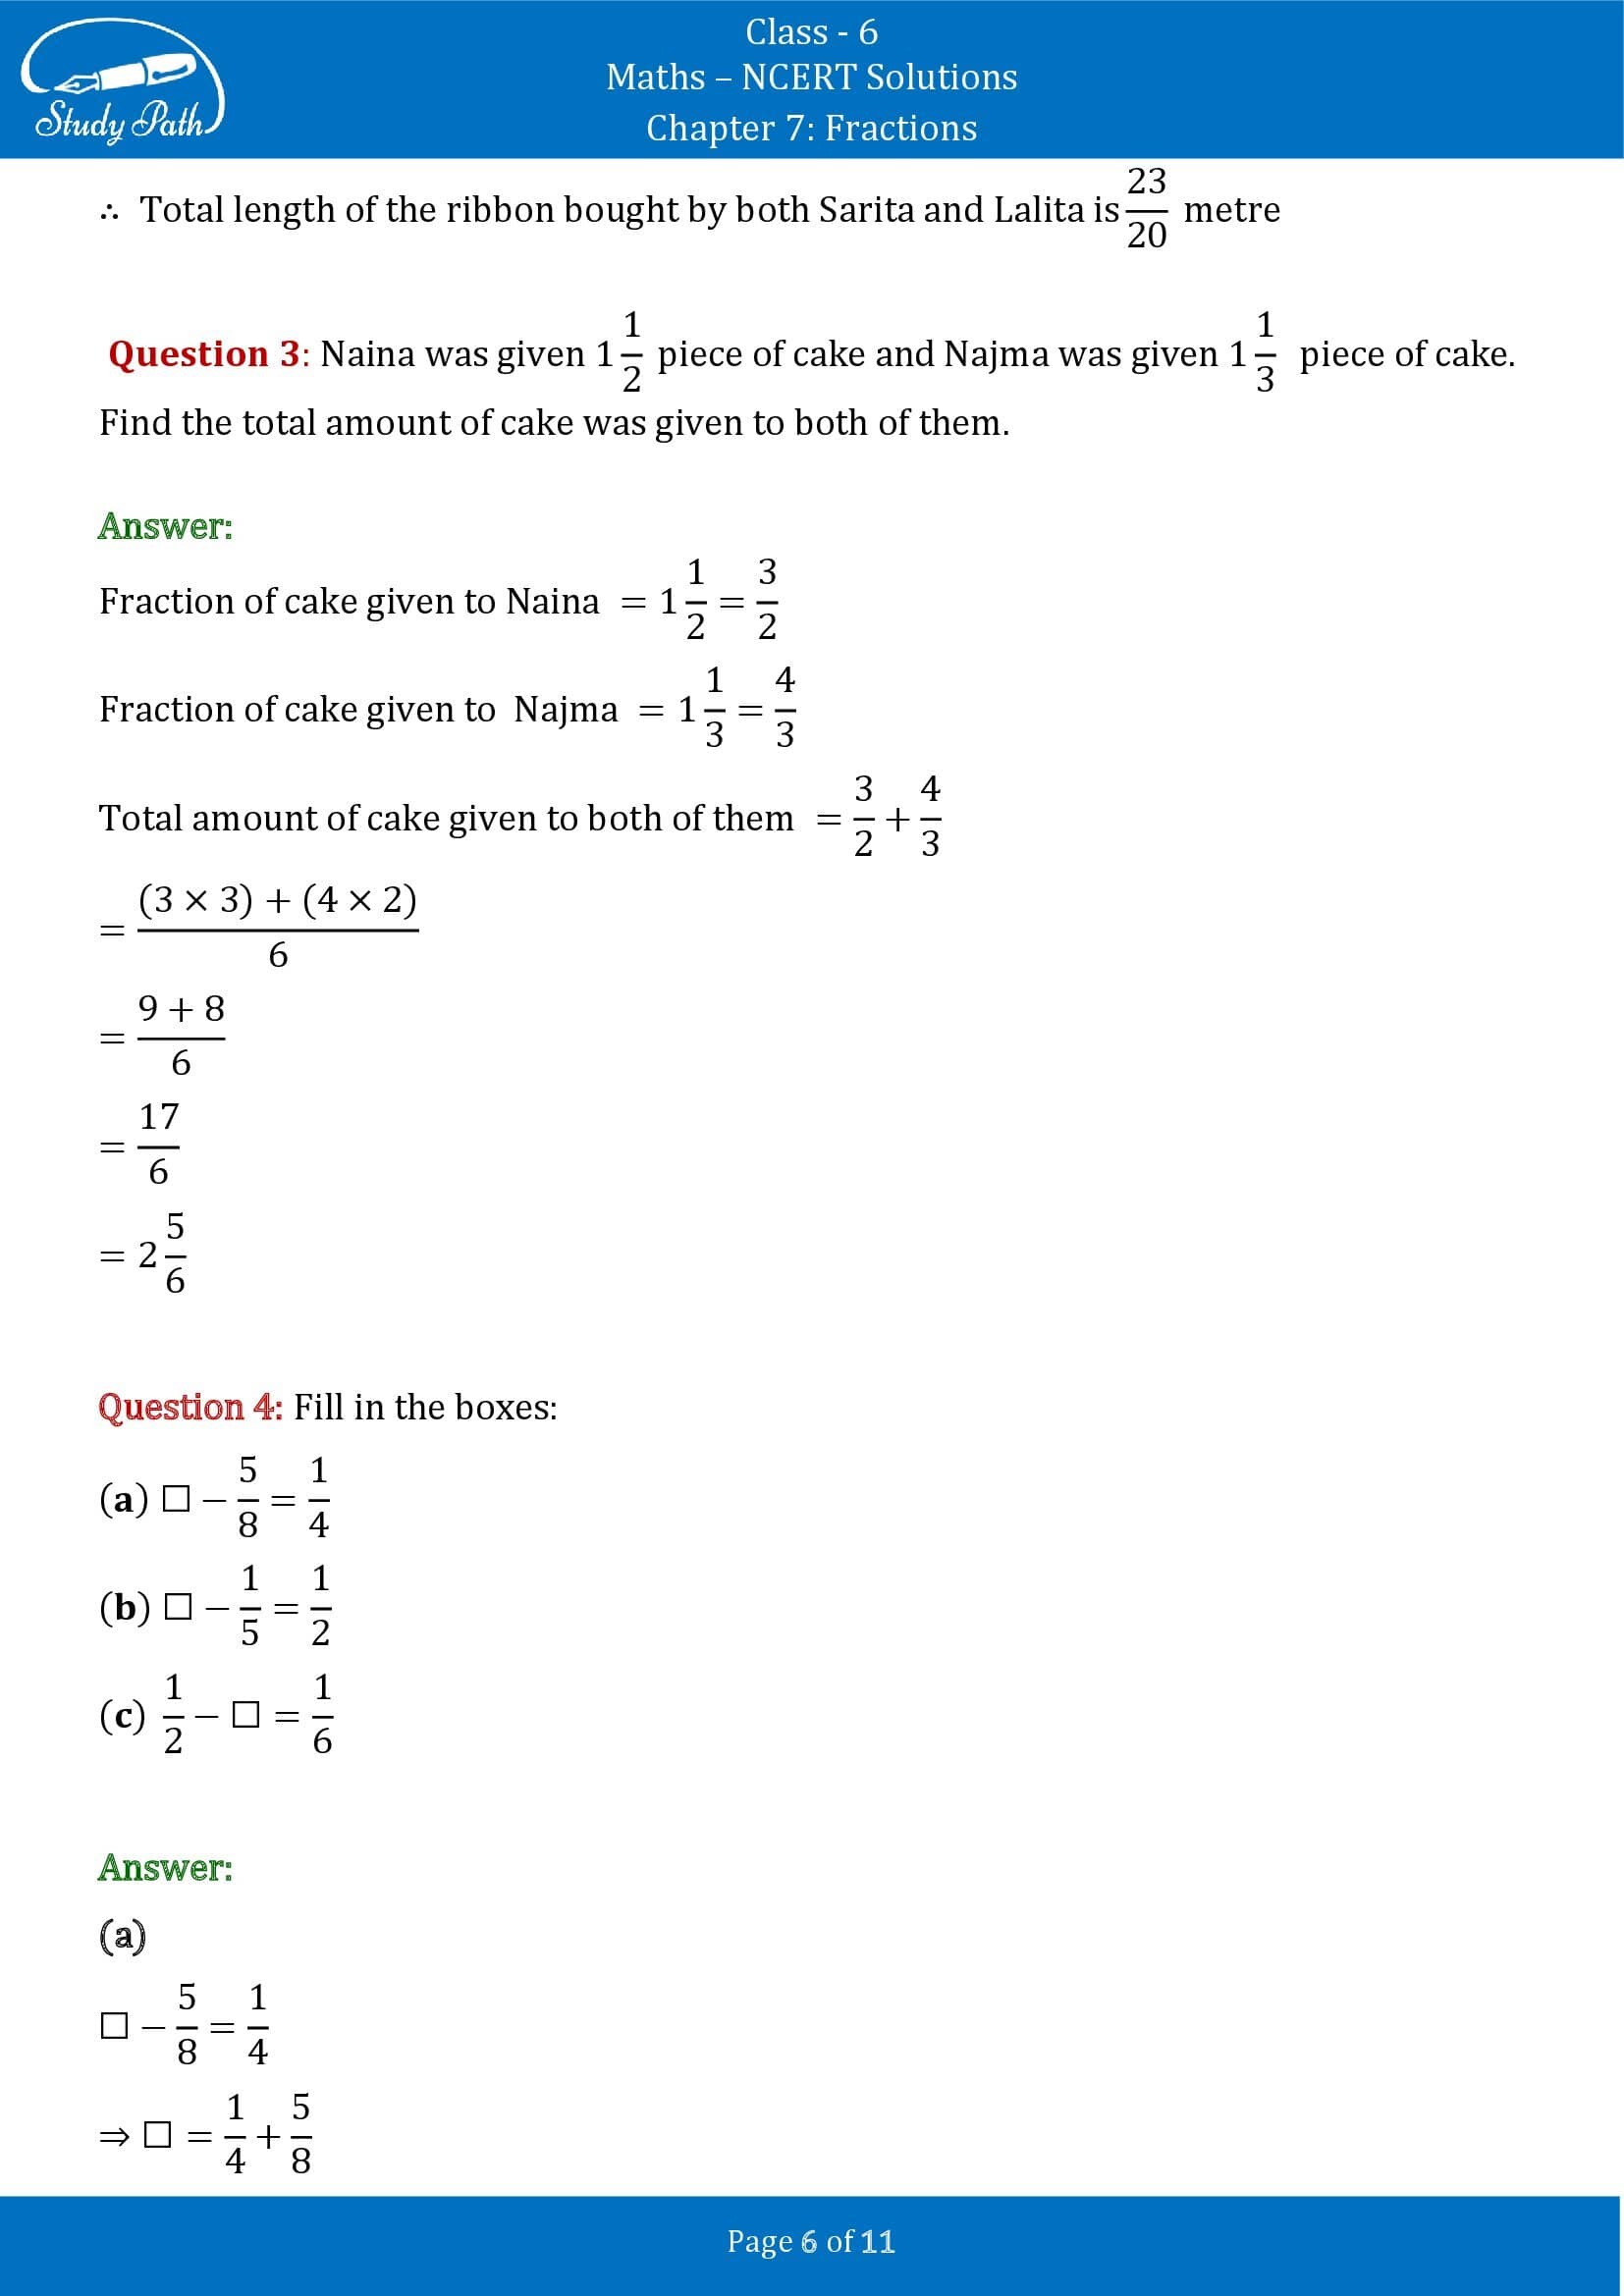 NCERT Solutions for Class 6 Maths Chapter 7 Fractions Exercise 7.6 0006